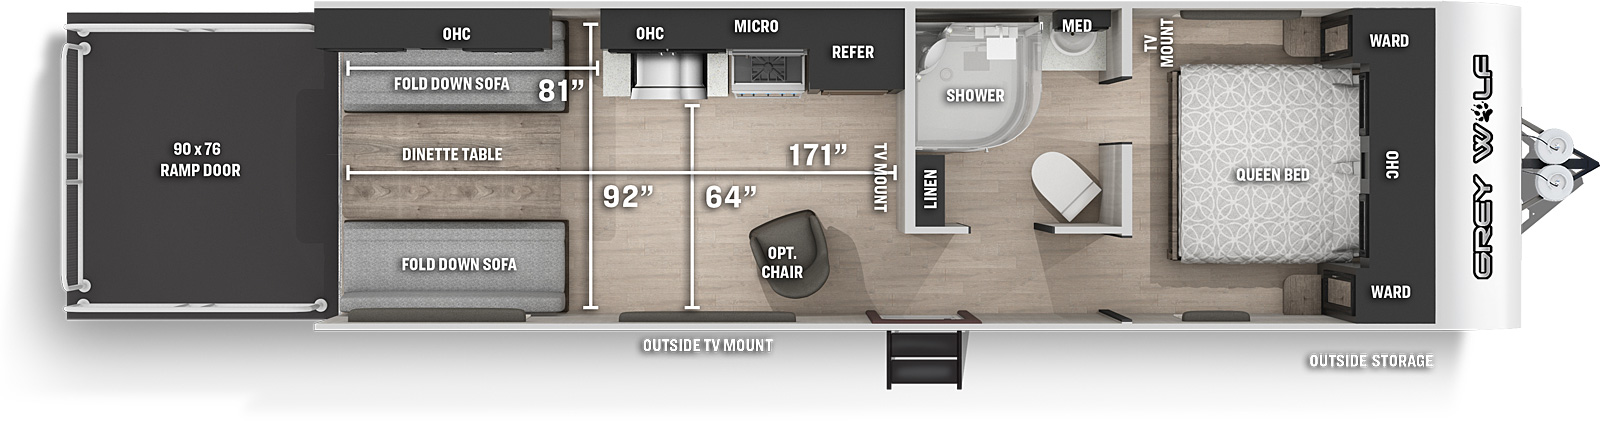 The 25 RRT has no slide outs, a rear ramp door and door side entry door. The interior layout from front to back: a front bedroom with foot facing queen bed; a side aisle pass through bathroom; a off-door side kitchen countertop with sink, overhead microwave, overhead cabinets, cook top stove and refrigerator; an optional chair across from the kitchen countertop; and opposing wall fold down sofas and dinette table in the rear. Cargo area measurements include: 171 inches from the rear of the trailer to the bathroom wall; 64 inches from the kitchen countertop to the door side wall; 92 inches from off-door side wall to door side wall; and 81 inches from rear of trailer to the kitchen countertop.